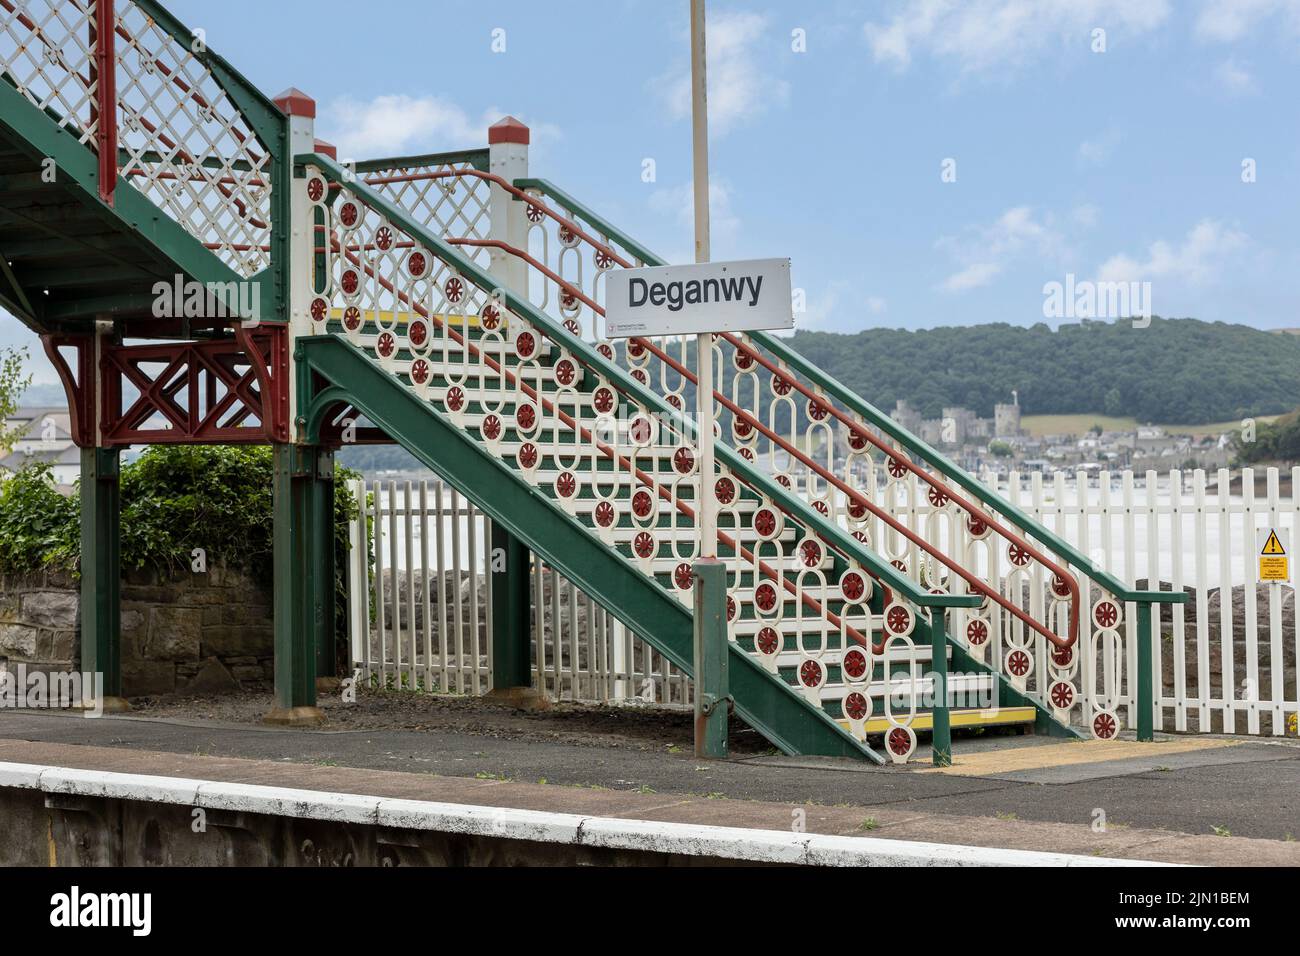 Deganwy  north Wales united kingdom 01 August 2022  Deganwy  railway station ornate and colourful bridge, conway castle in background Stock Photo